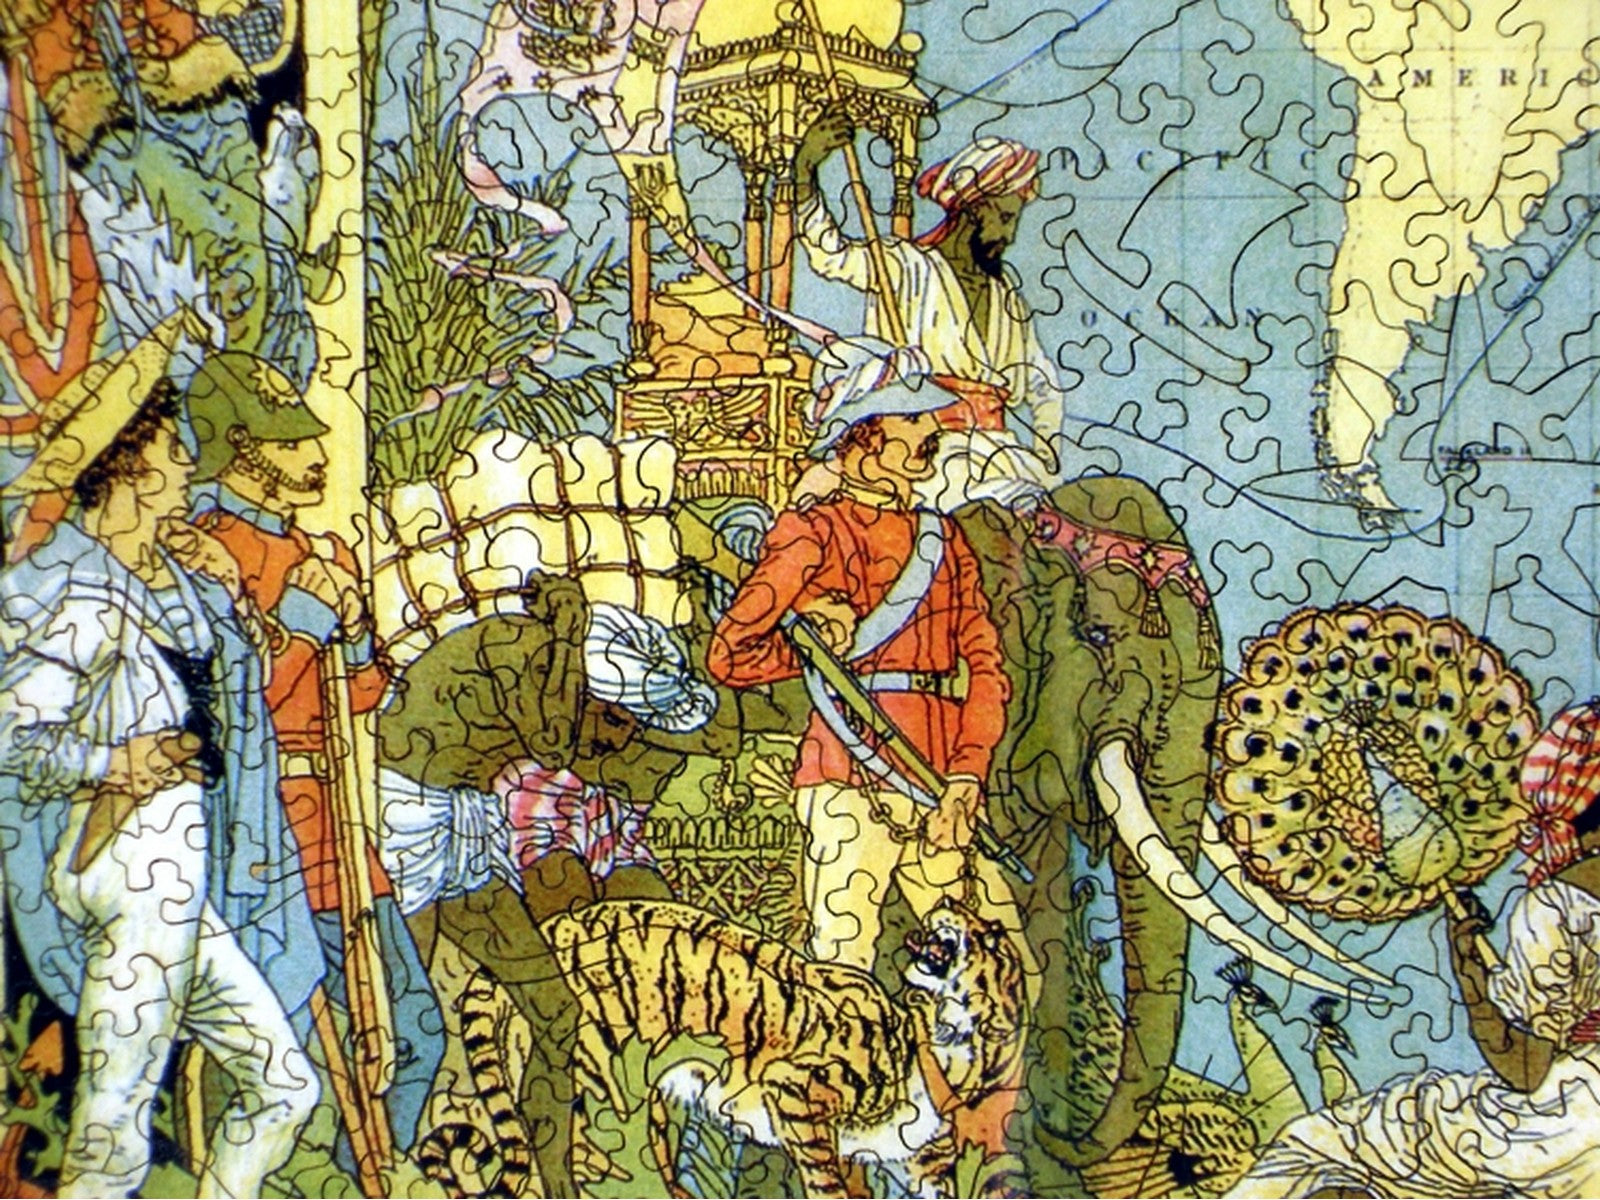 A closeup of the front of the puzzle, Map of the British Empire, showing the detail in the pieces.